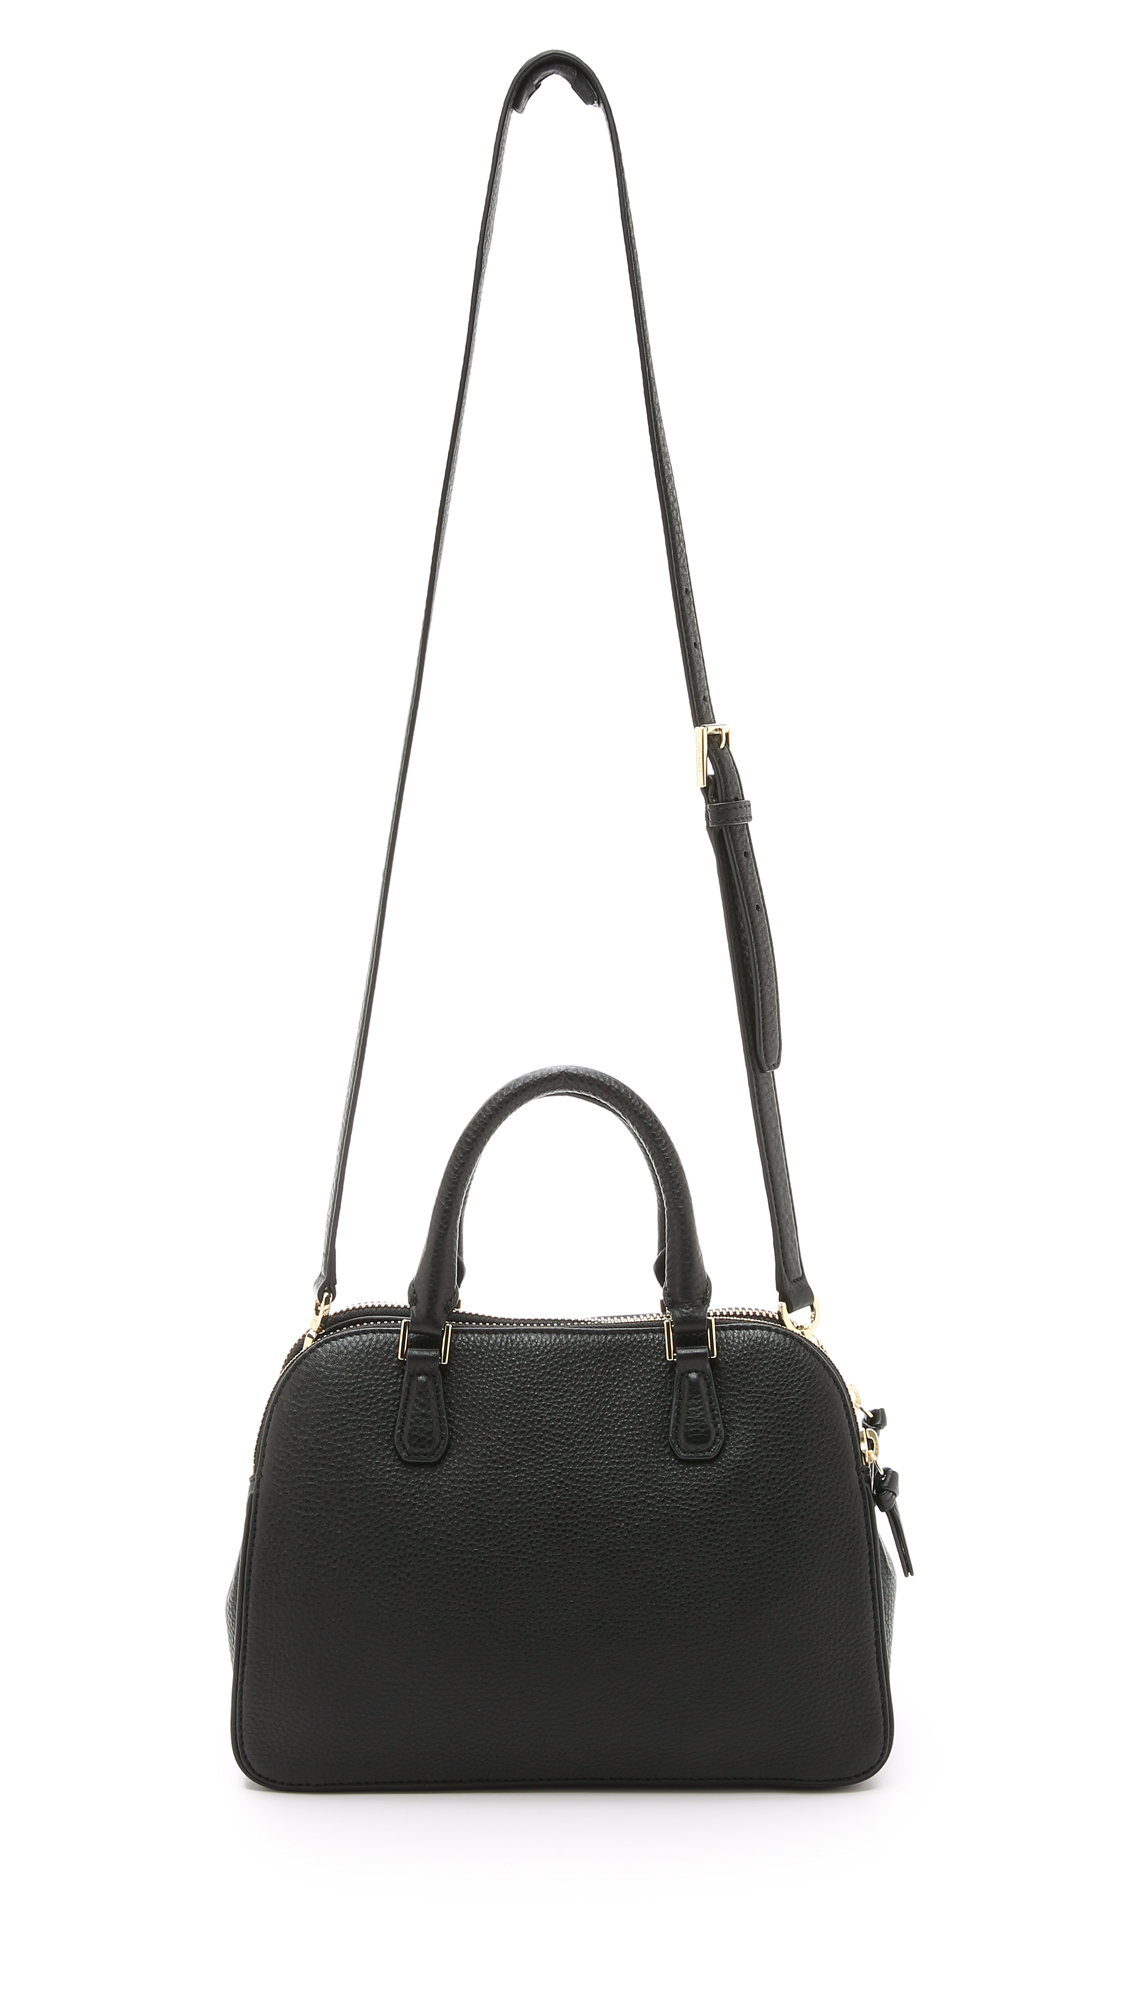 Tory Burch 'robinson' Small Double Zip Pebbled Leather Satchel in Black